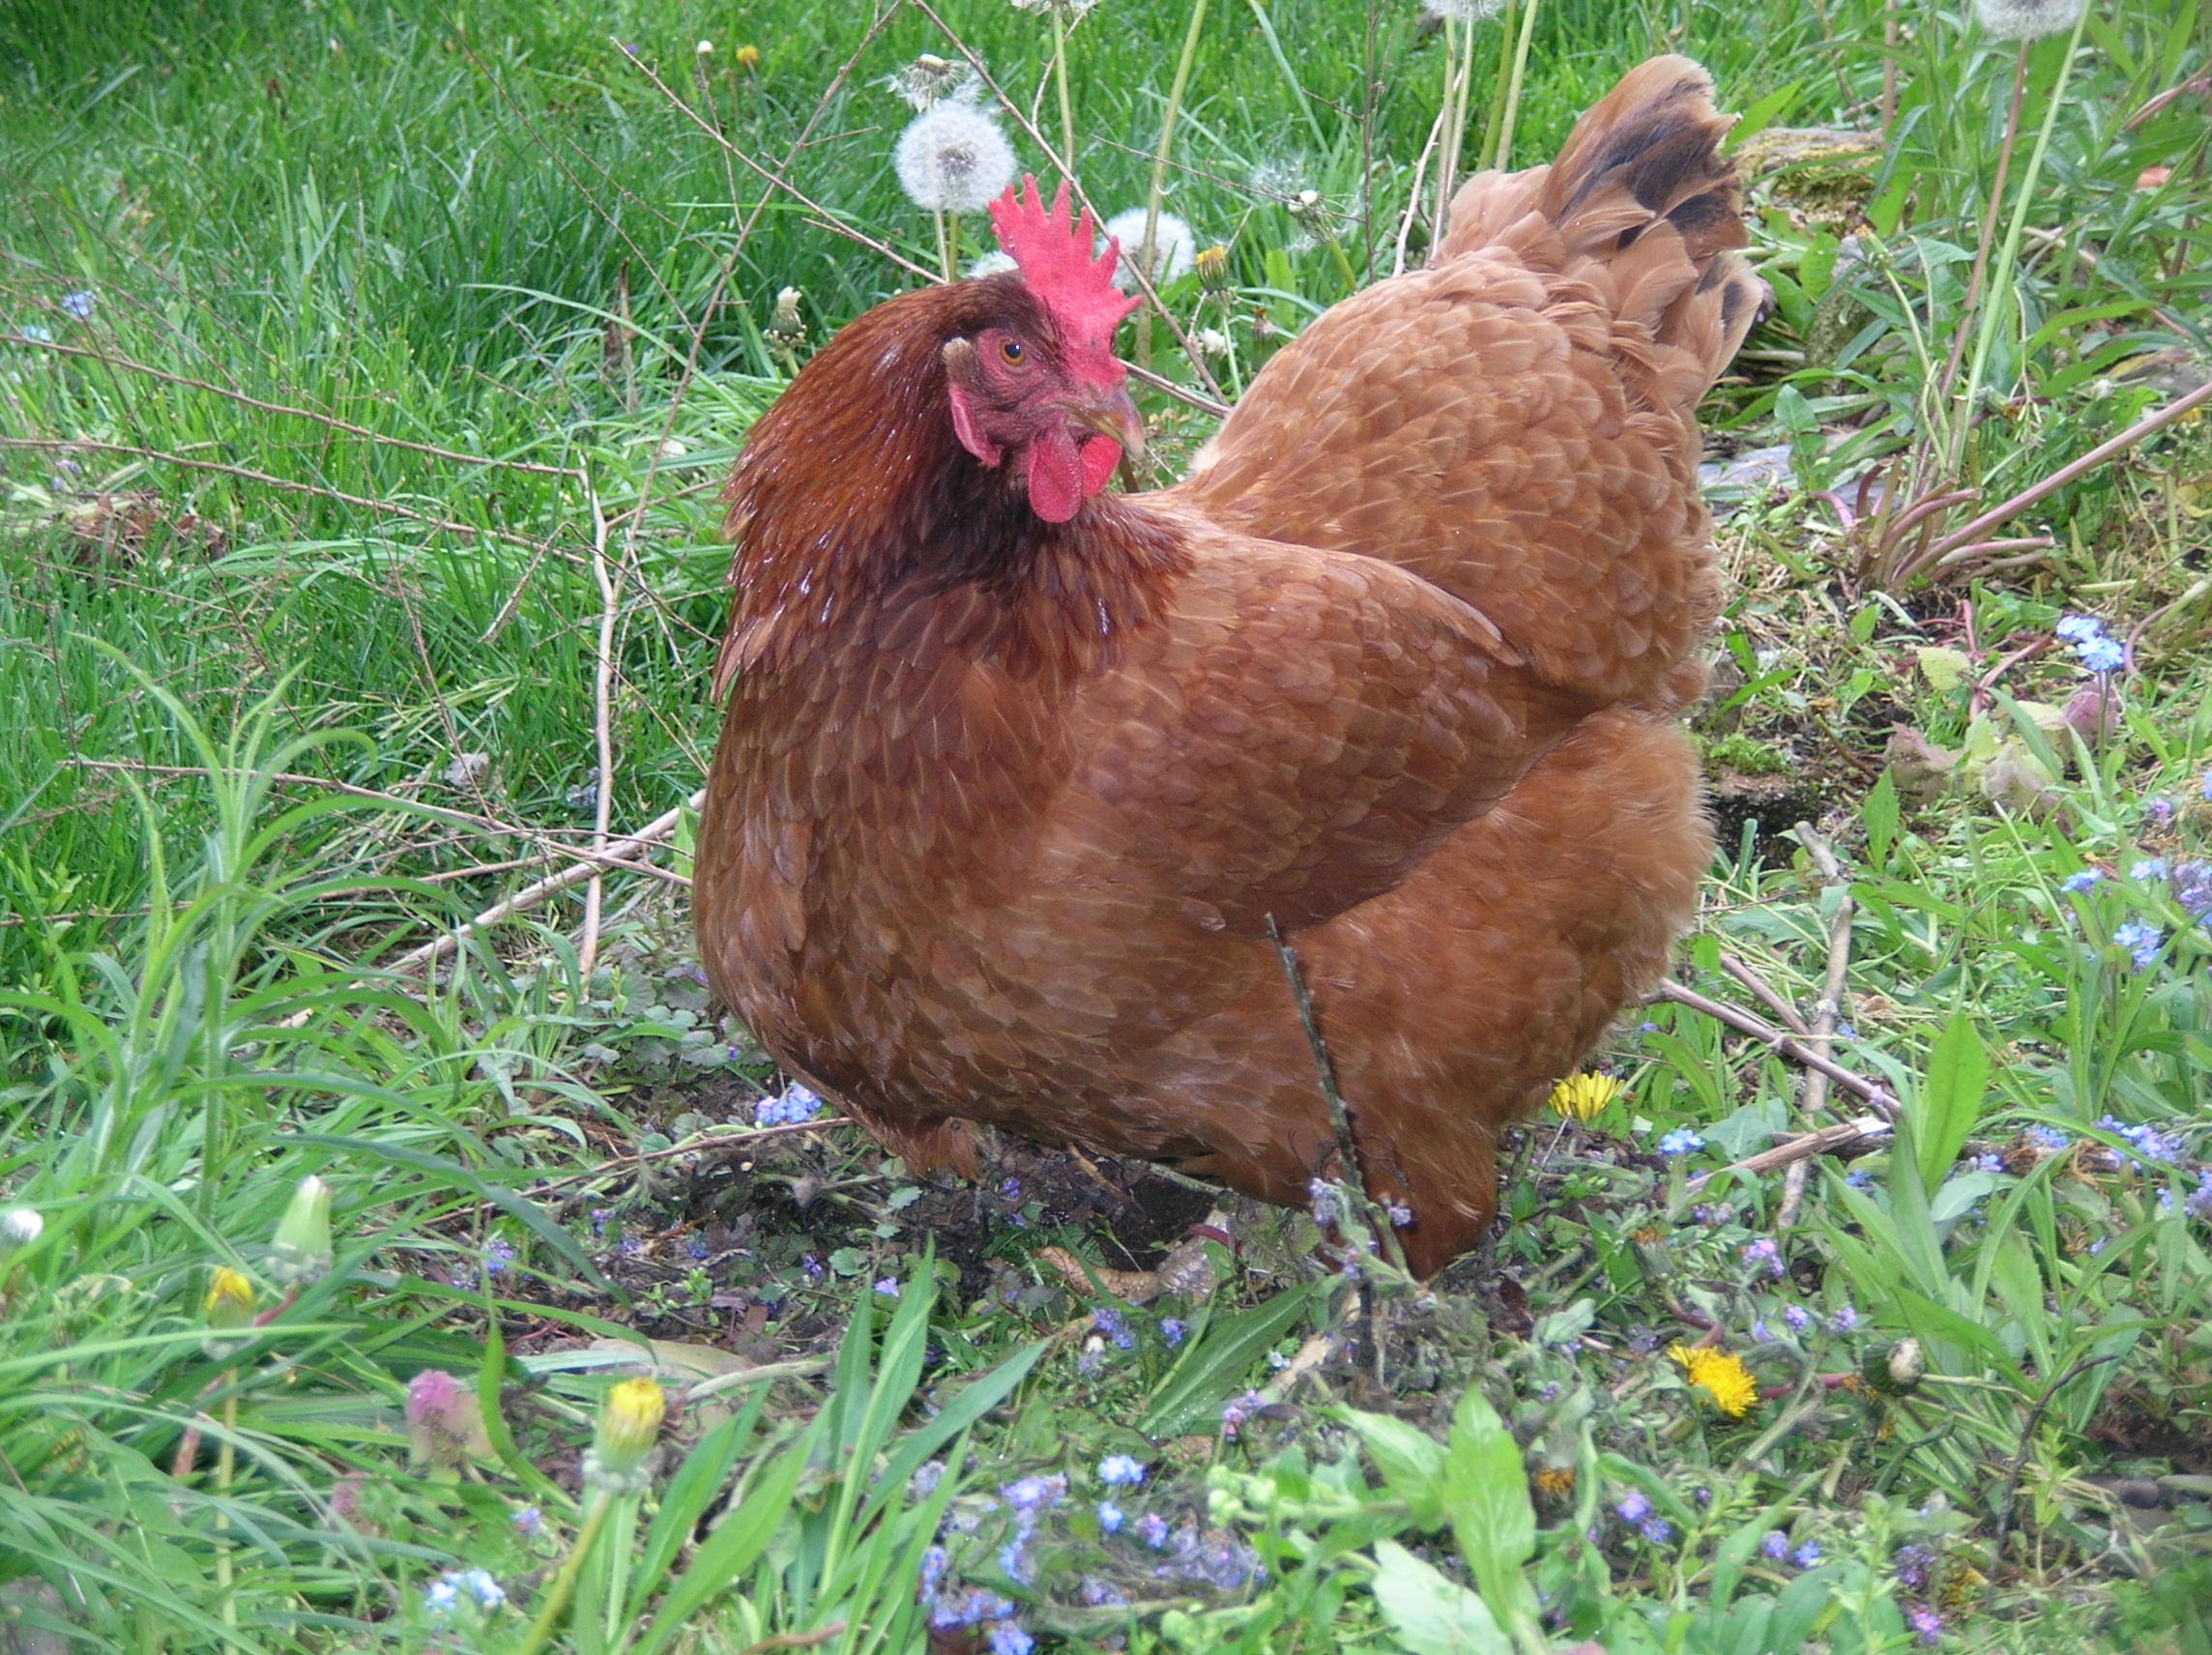 She IS a super model as far as chickens go.